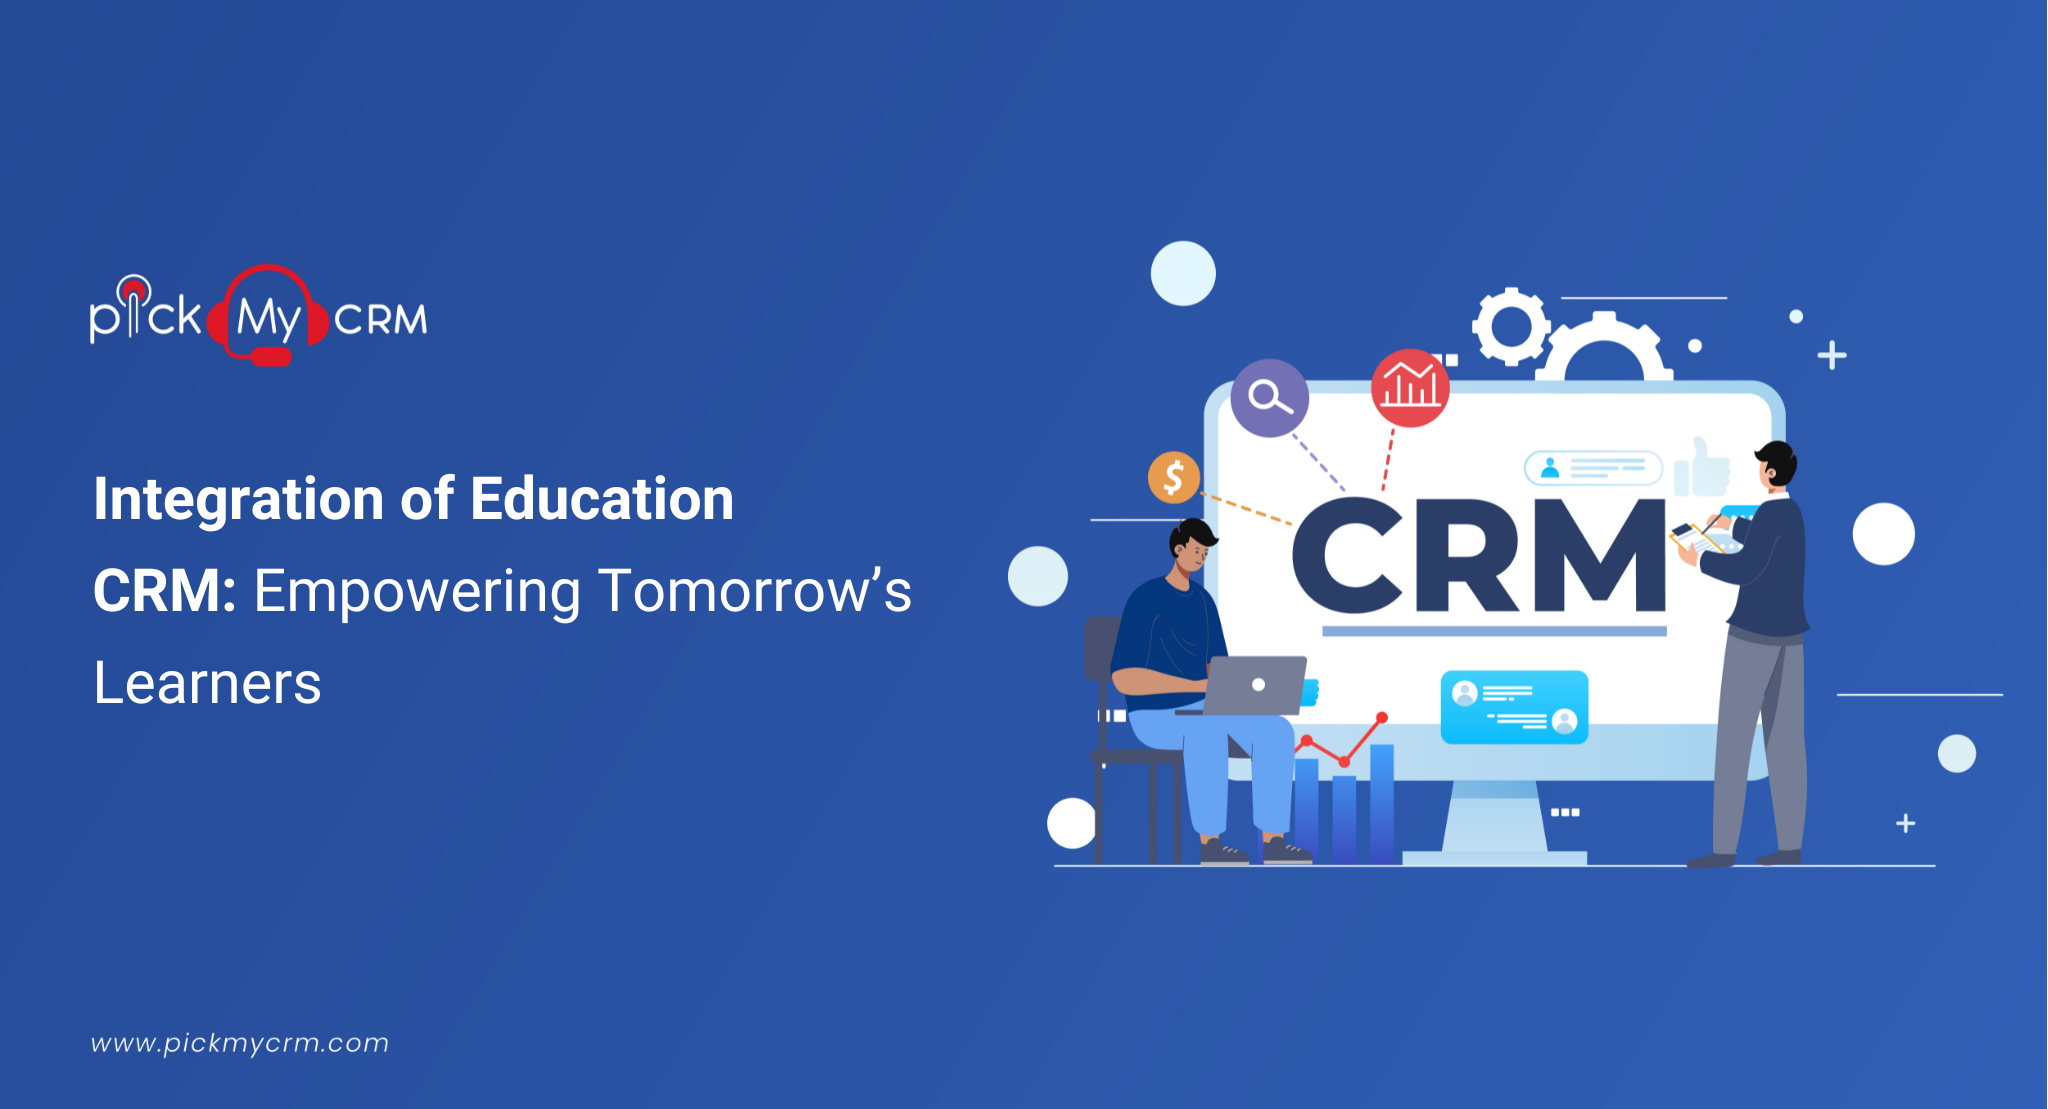 Integration of Education CRM: Empowering Tomorrow’s Learners